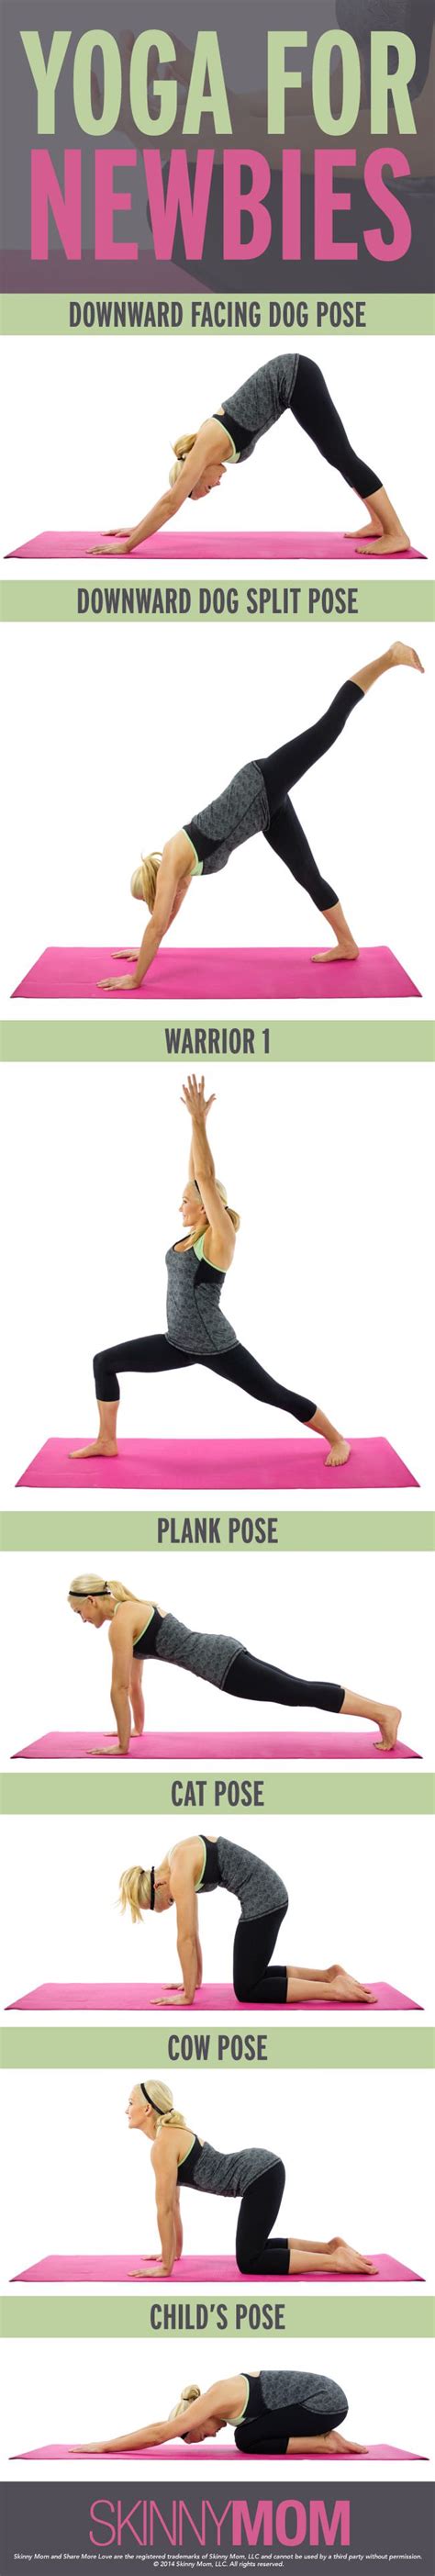 Yoga Poses For Beginners With Pictures Search Results